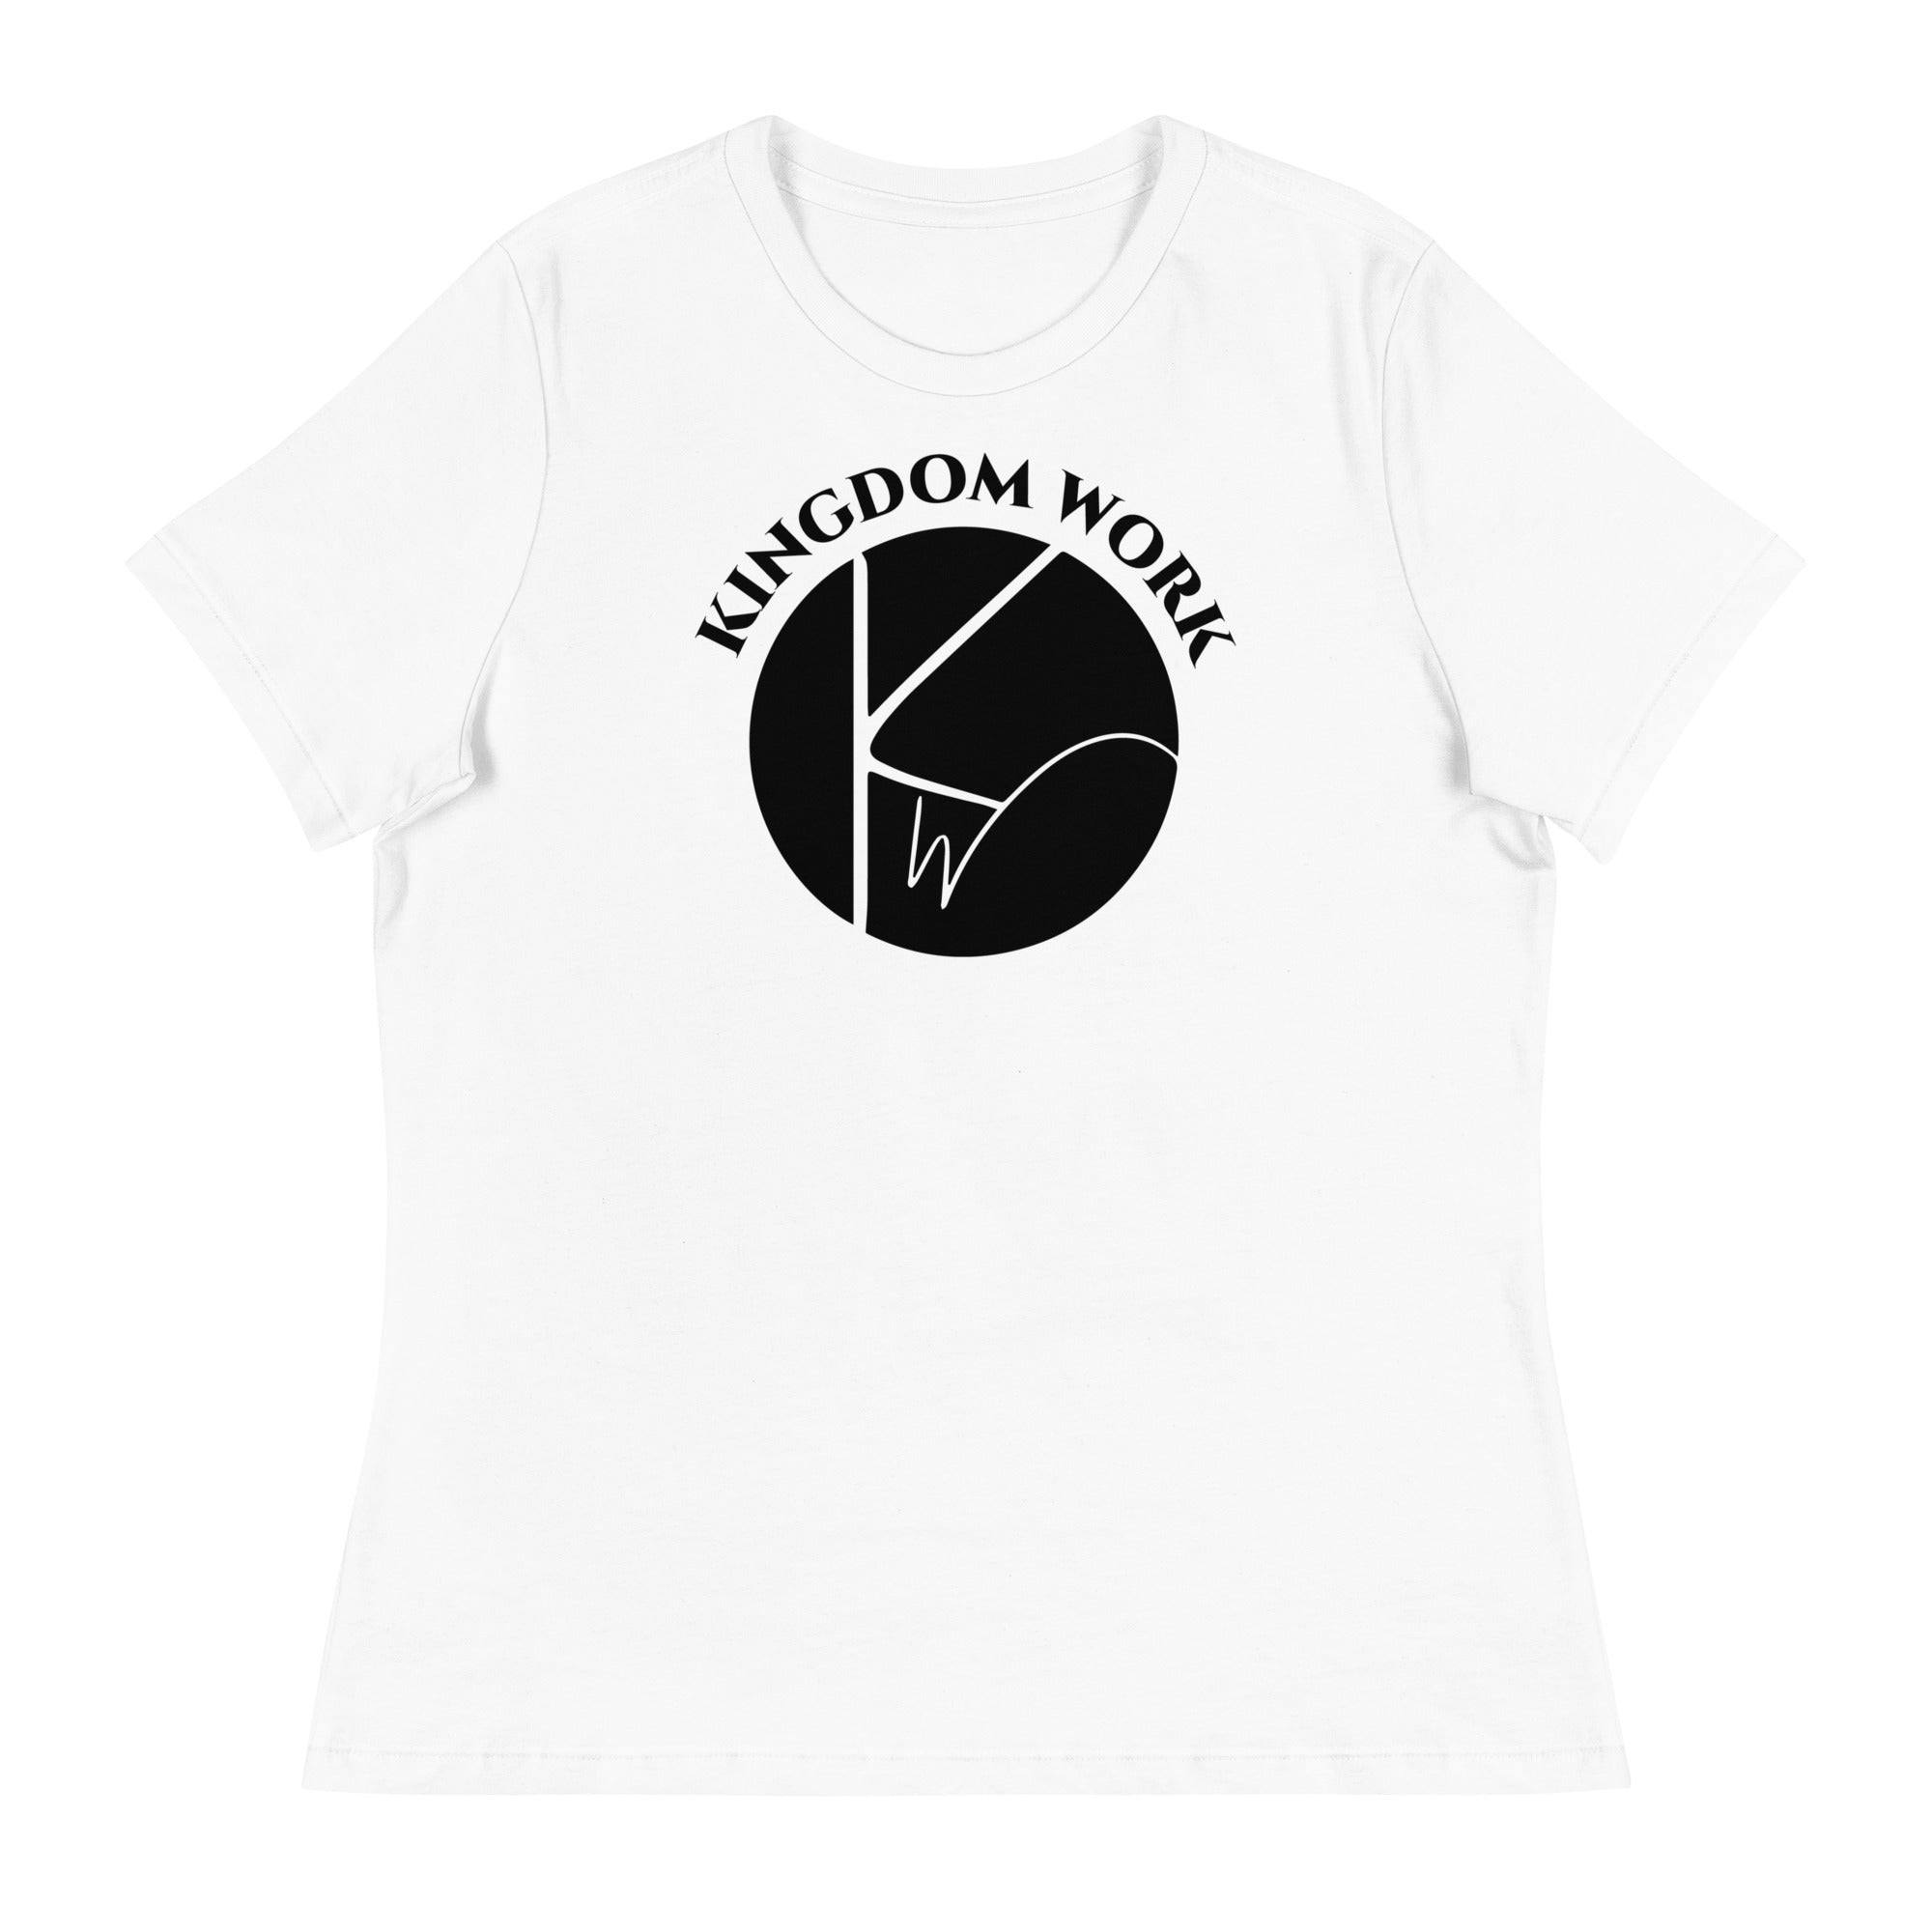 KINGDOM WORK 02 WOMENS FRONT AND BACK T-SHIRT